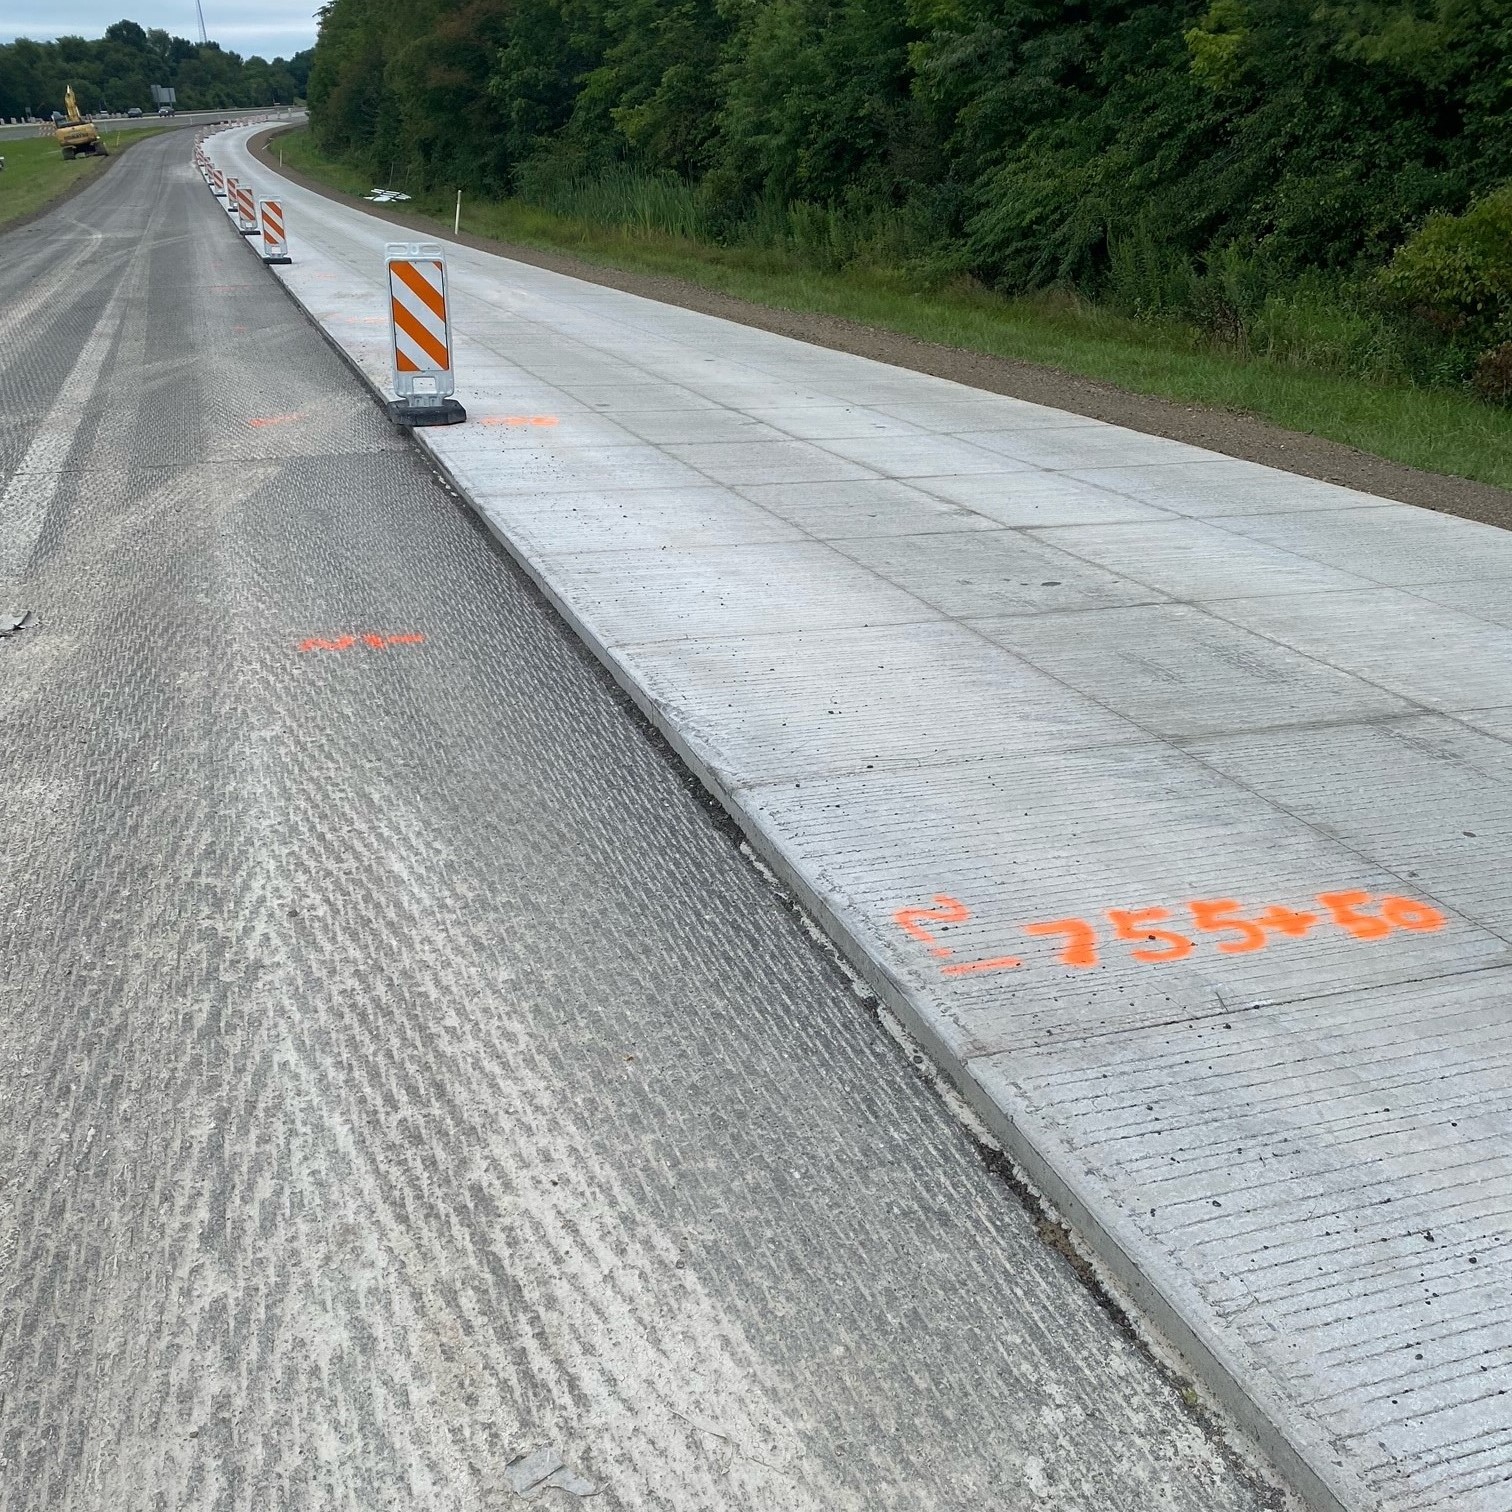 An image of a tree-lined, four-lane roadway with a grassy median between either side of the roadway with a line of orange and white work zone barricades between the completed lane and the lane be prepared for the concrete overlay